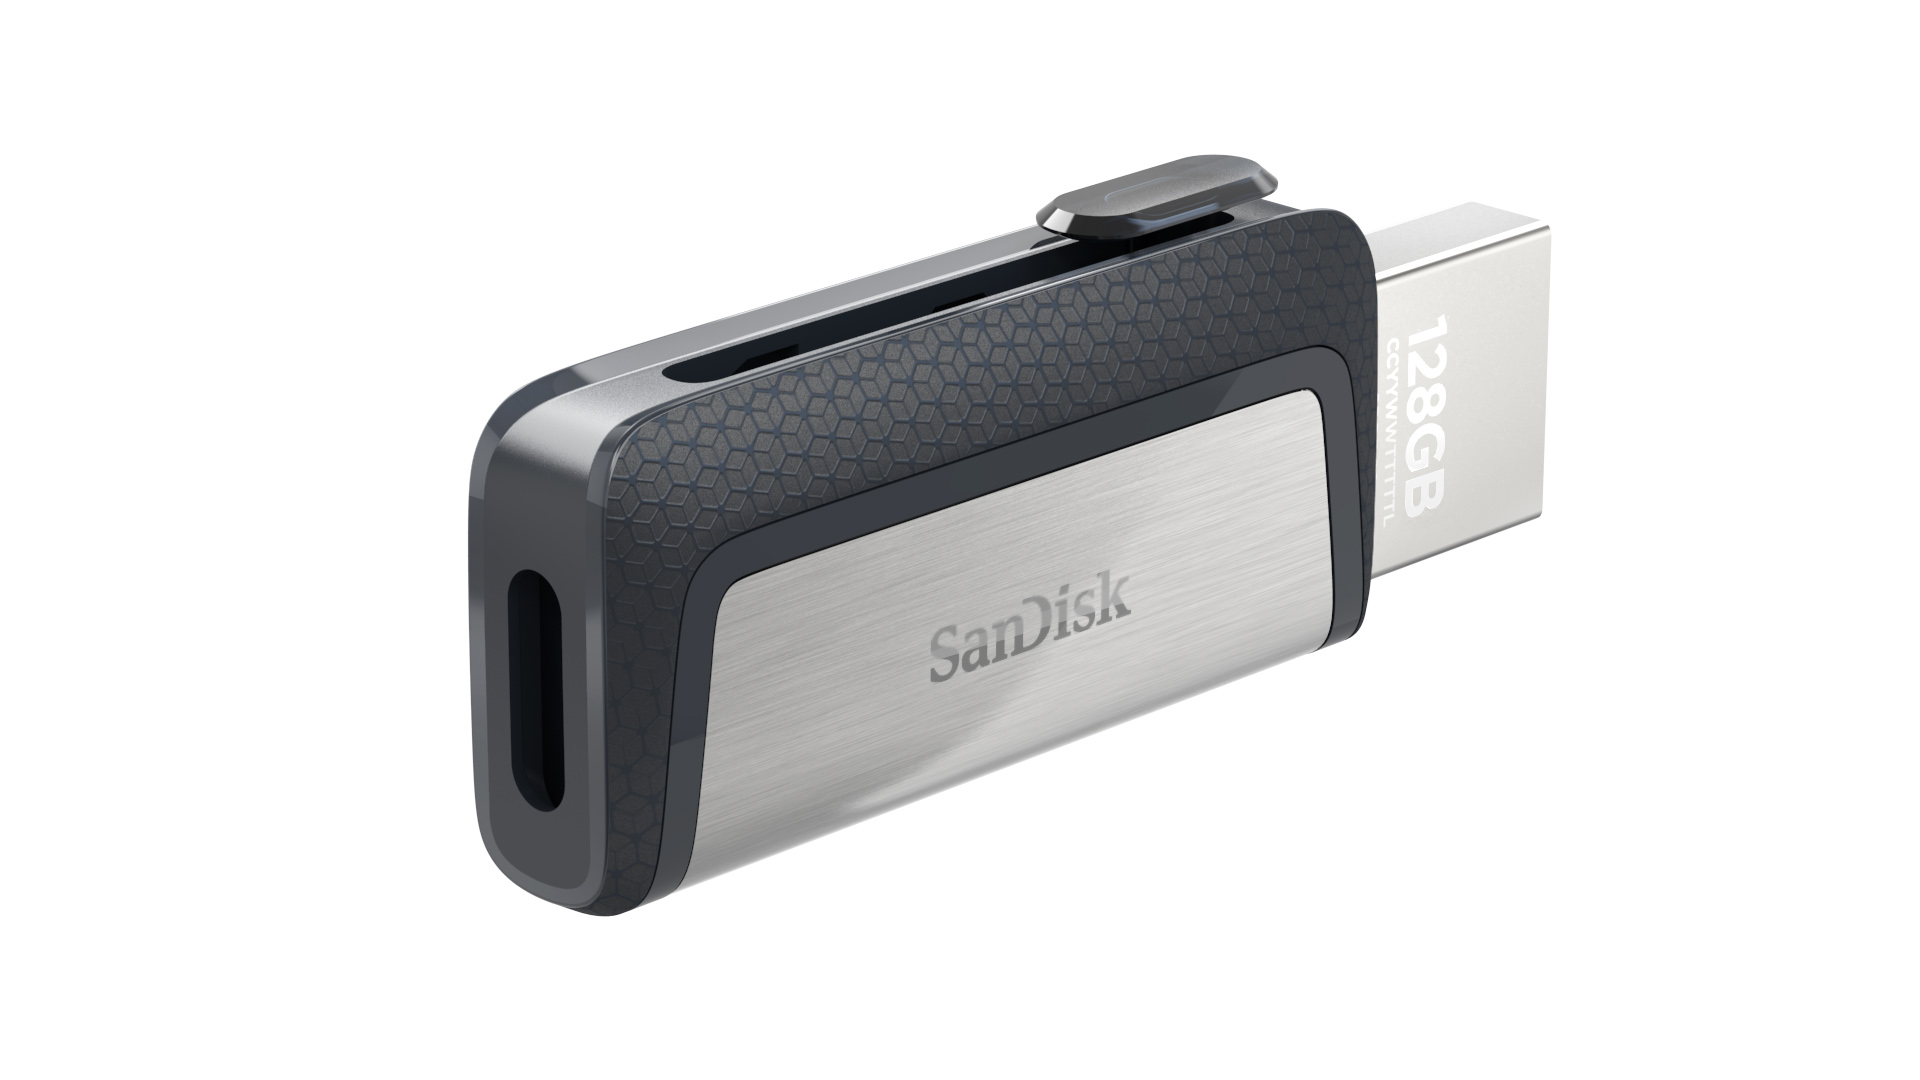 SanDisk mobile storage expanded with USB Type-C flash drive